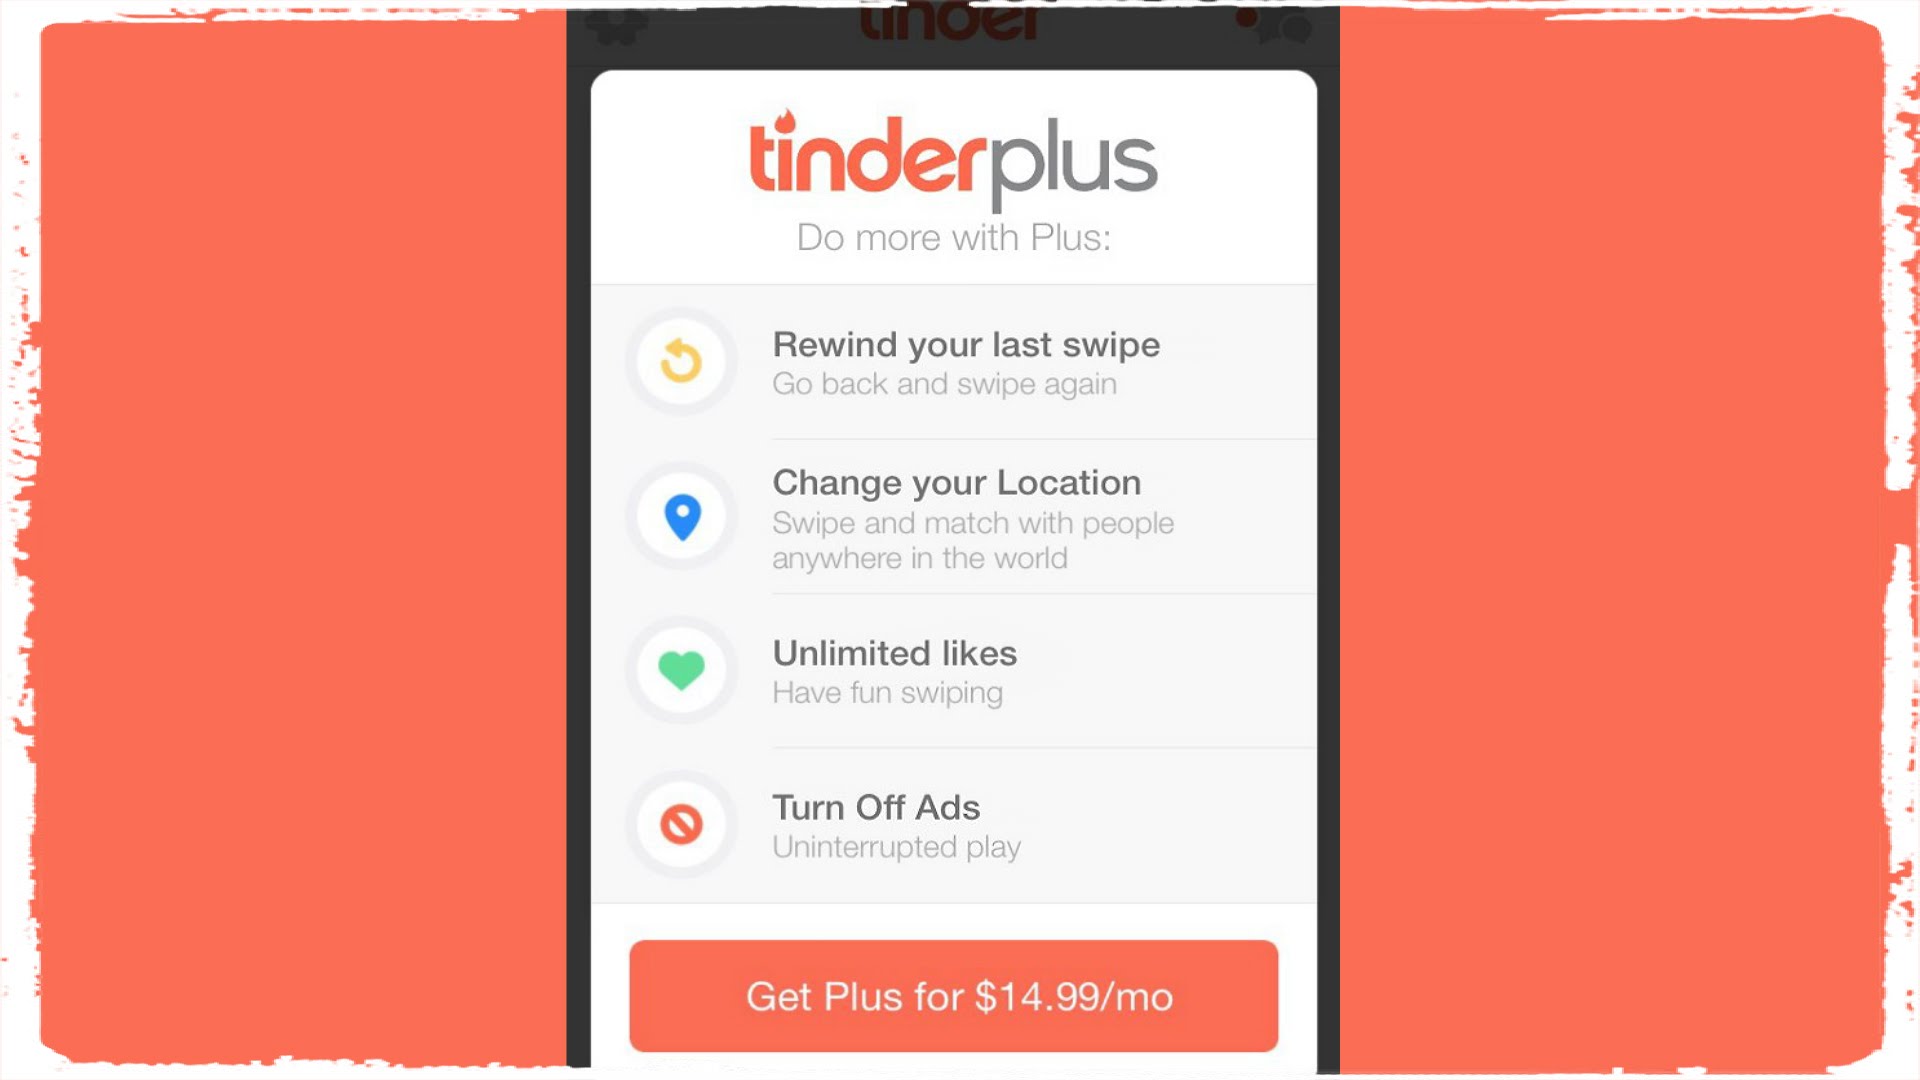 How To Download Tinder Plus For Free On Android